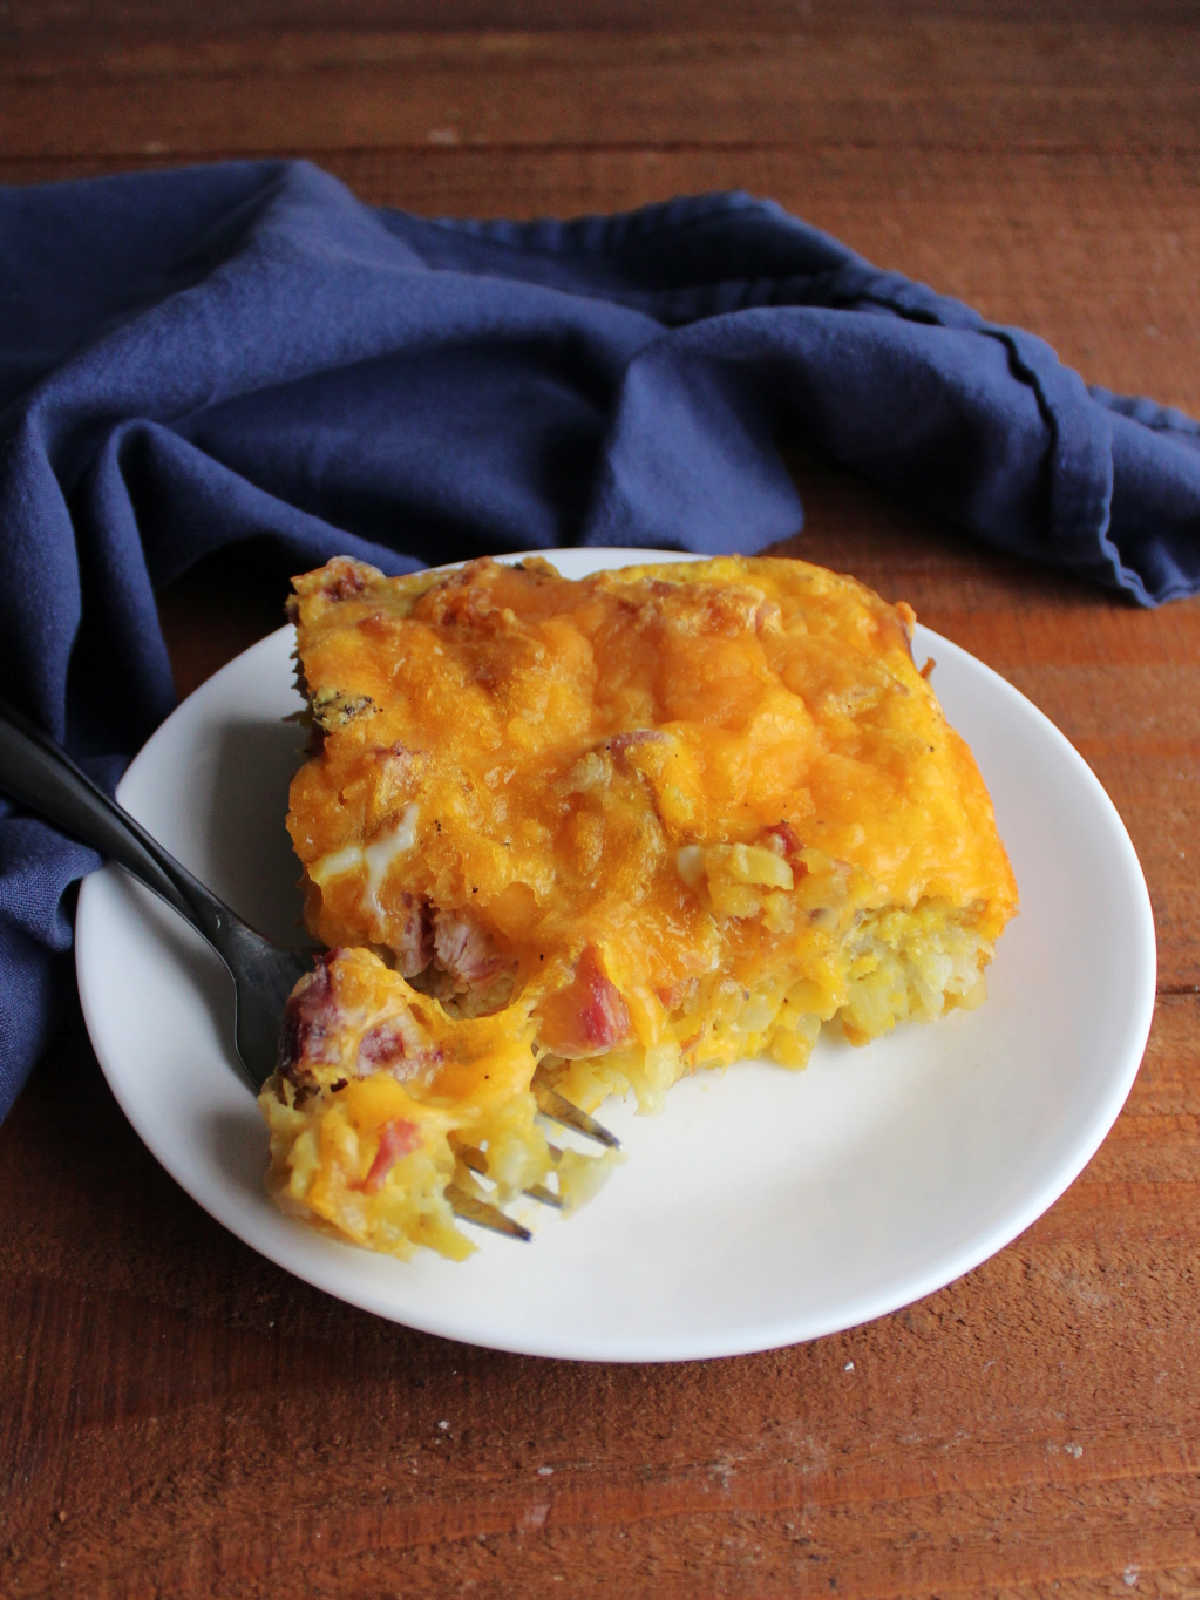 Bite of casserole on fork showing scrambled eggs, melted cheese, chunk of ham and tater tots baked inside. 